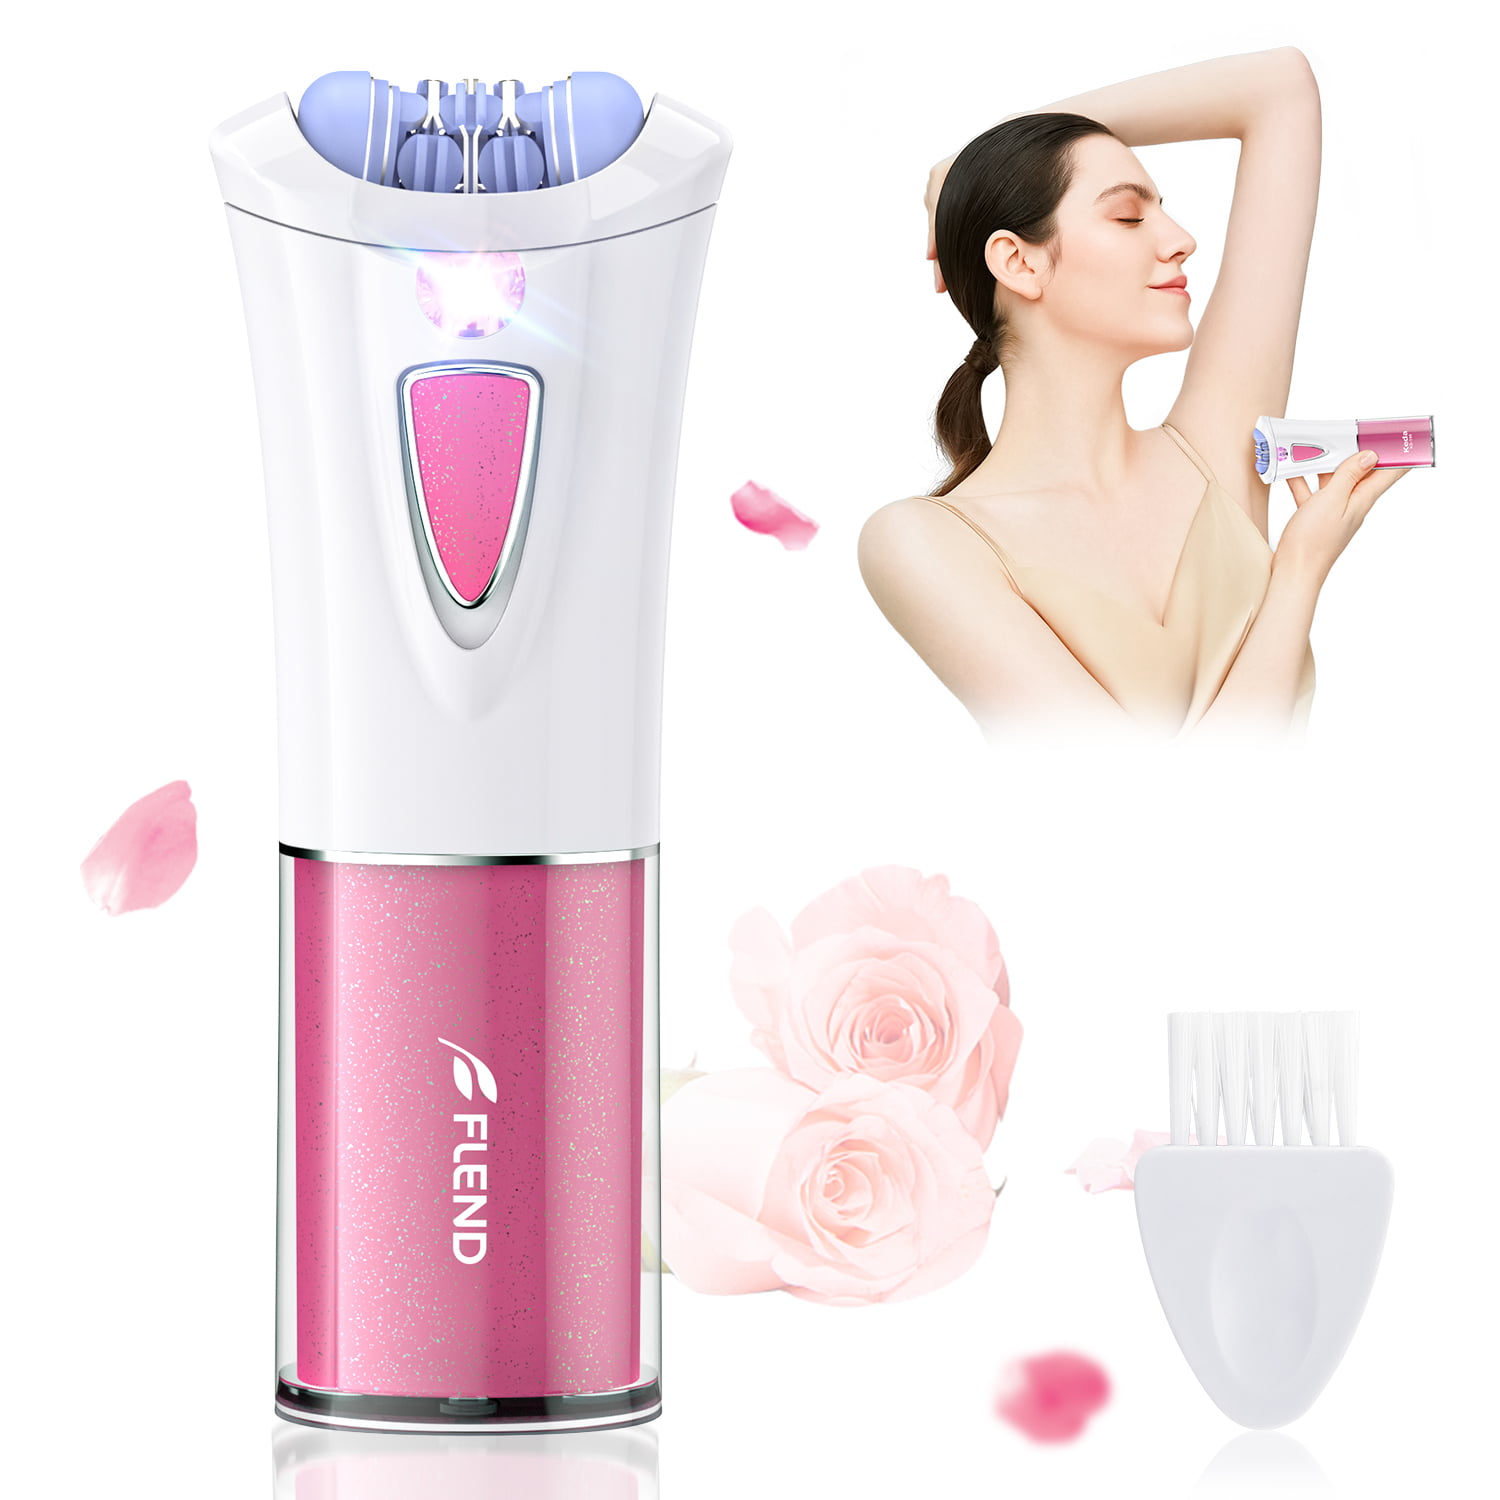 Queenmew Women's Facial Hair Epilator with LED